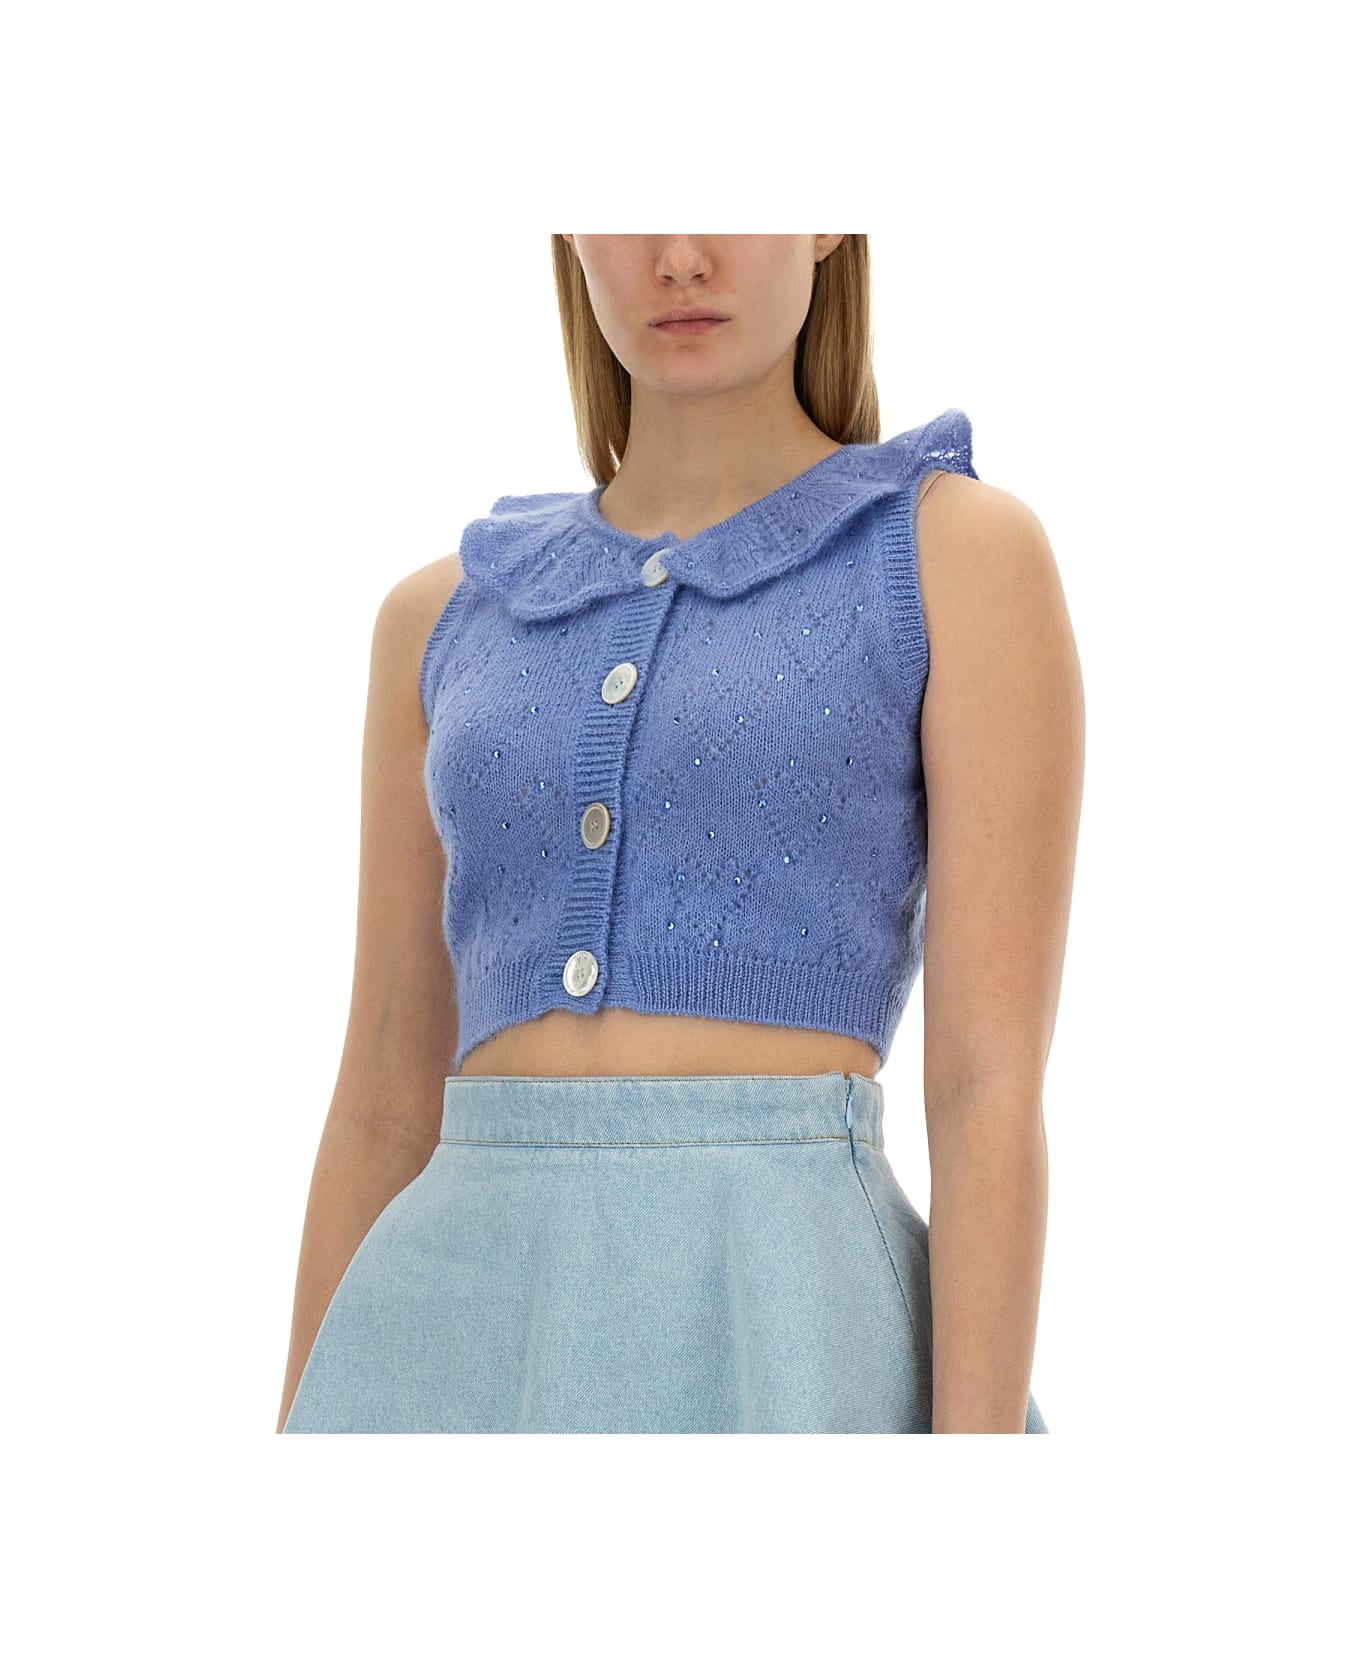 Alessandra Rich Knitted Tops. - AZURE